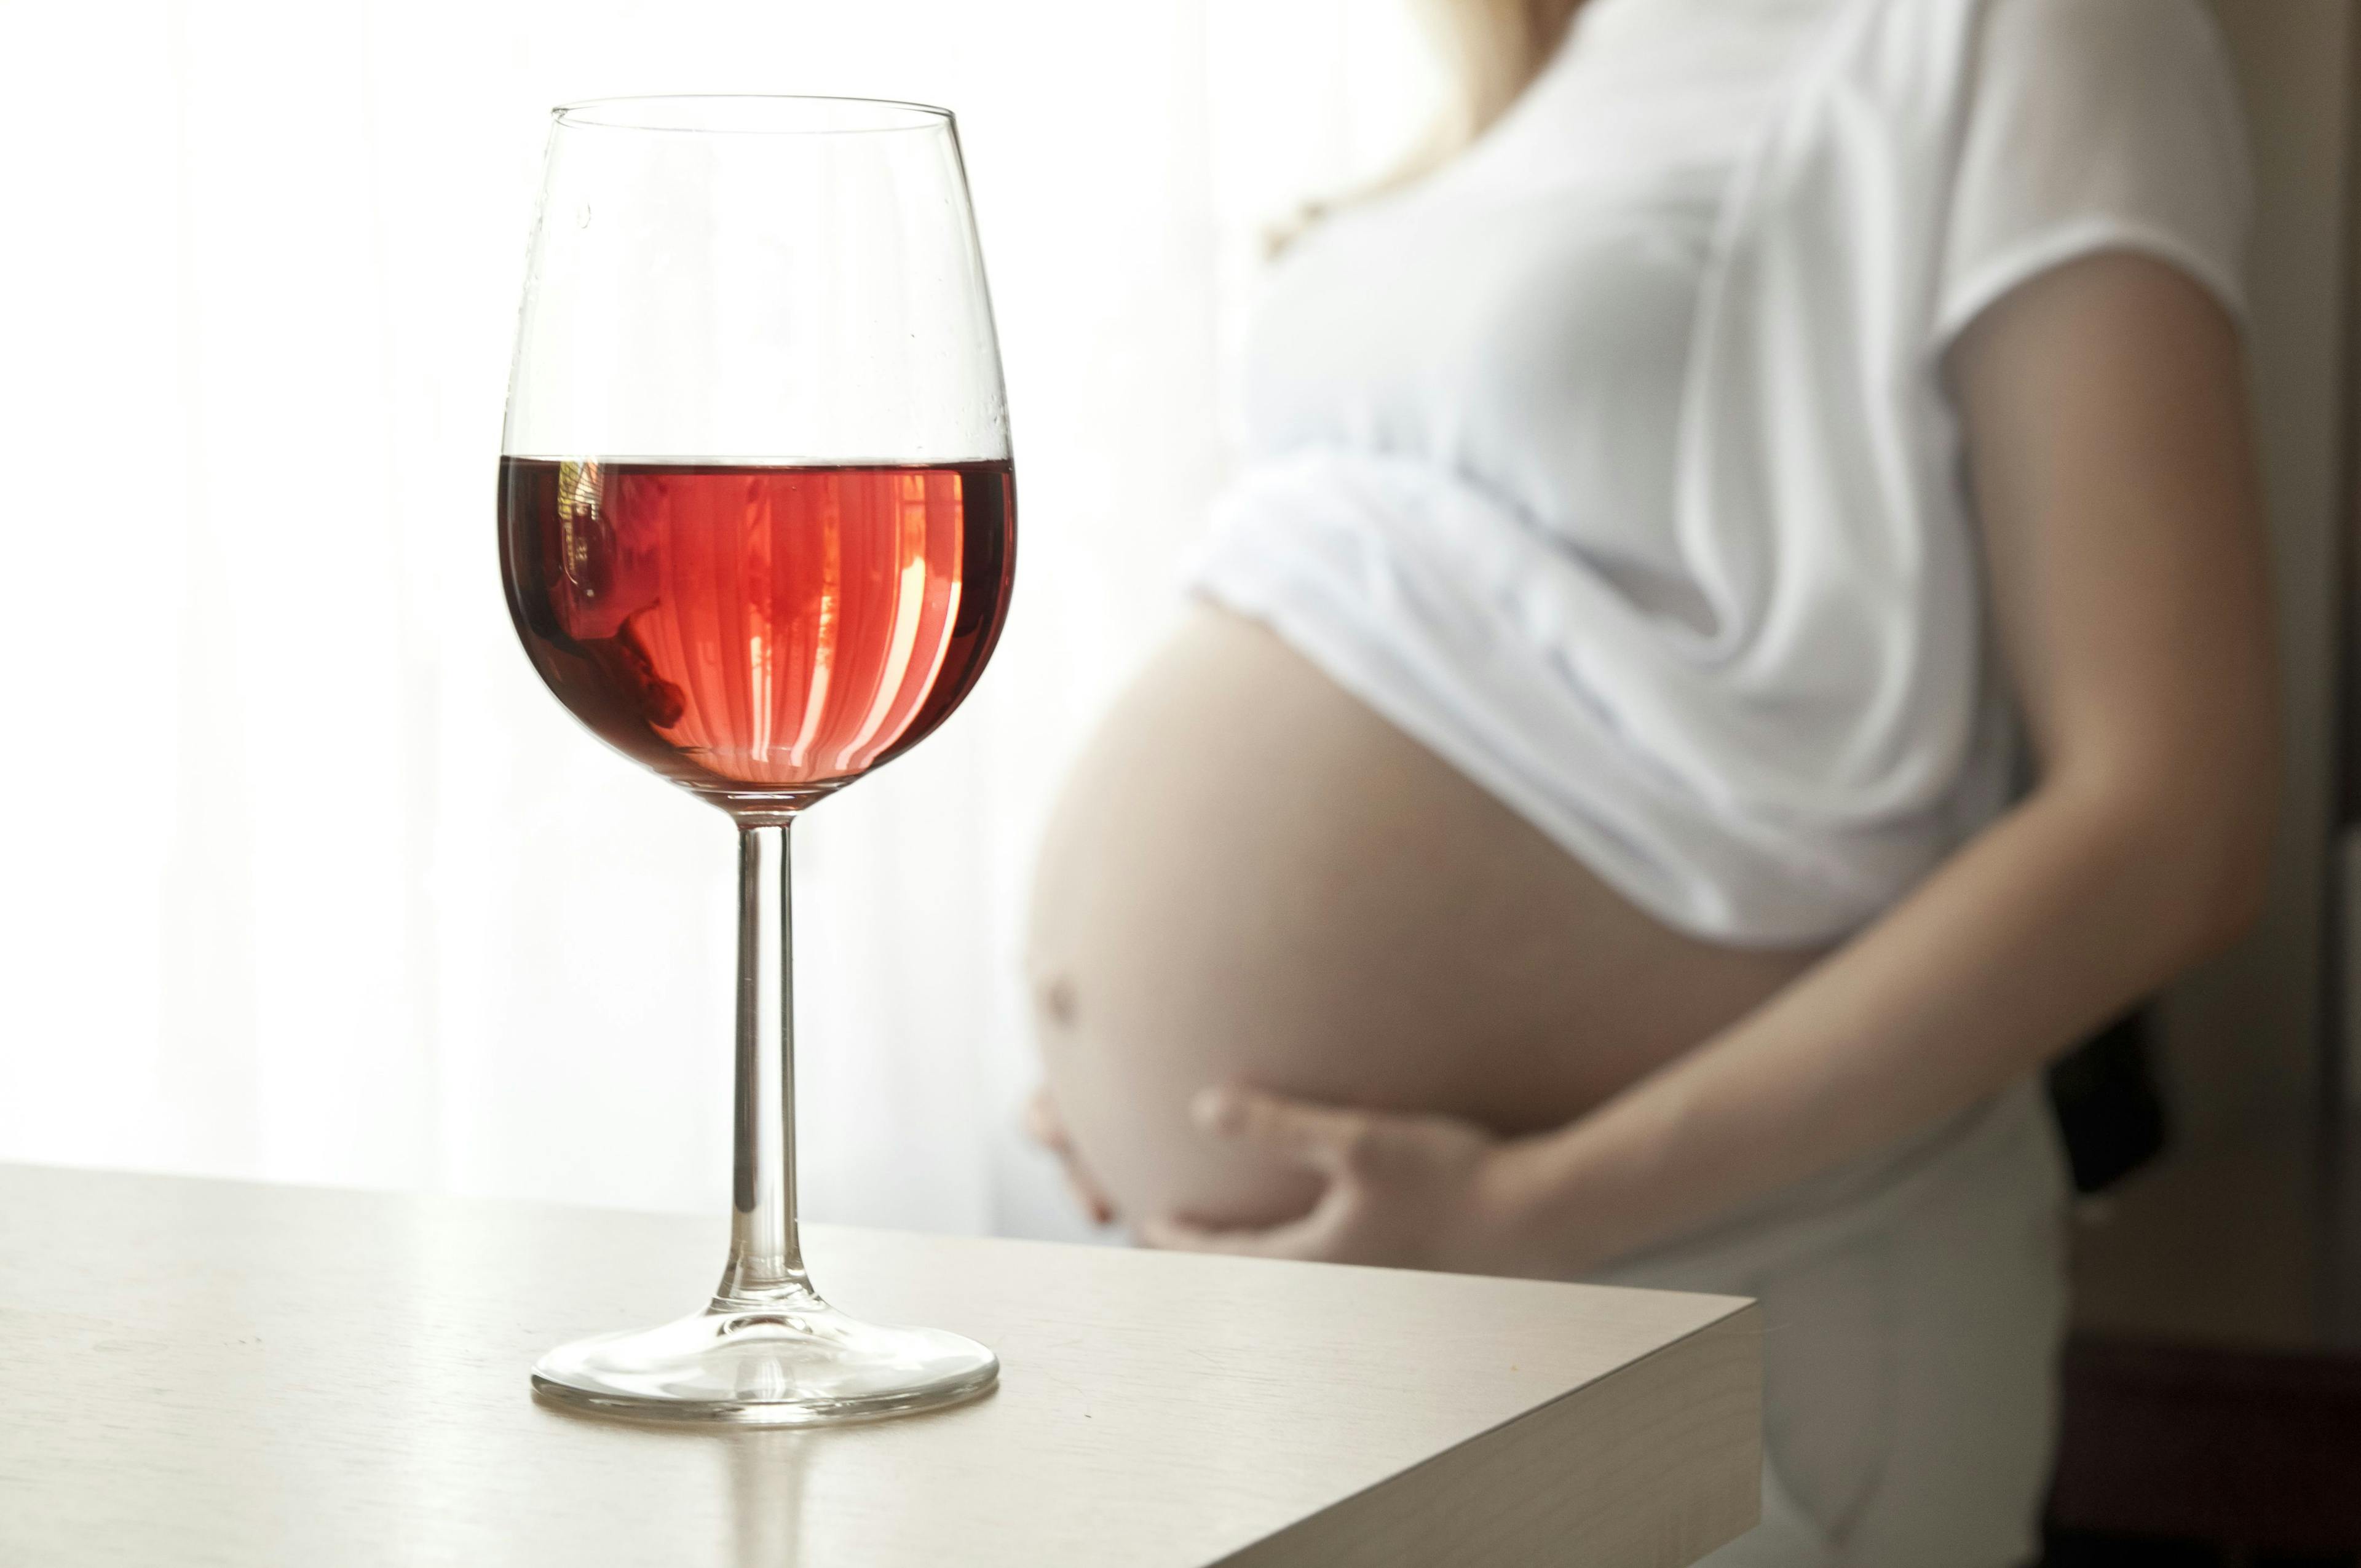 Pregnancy and wine